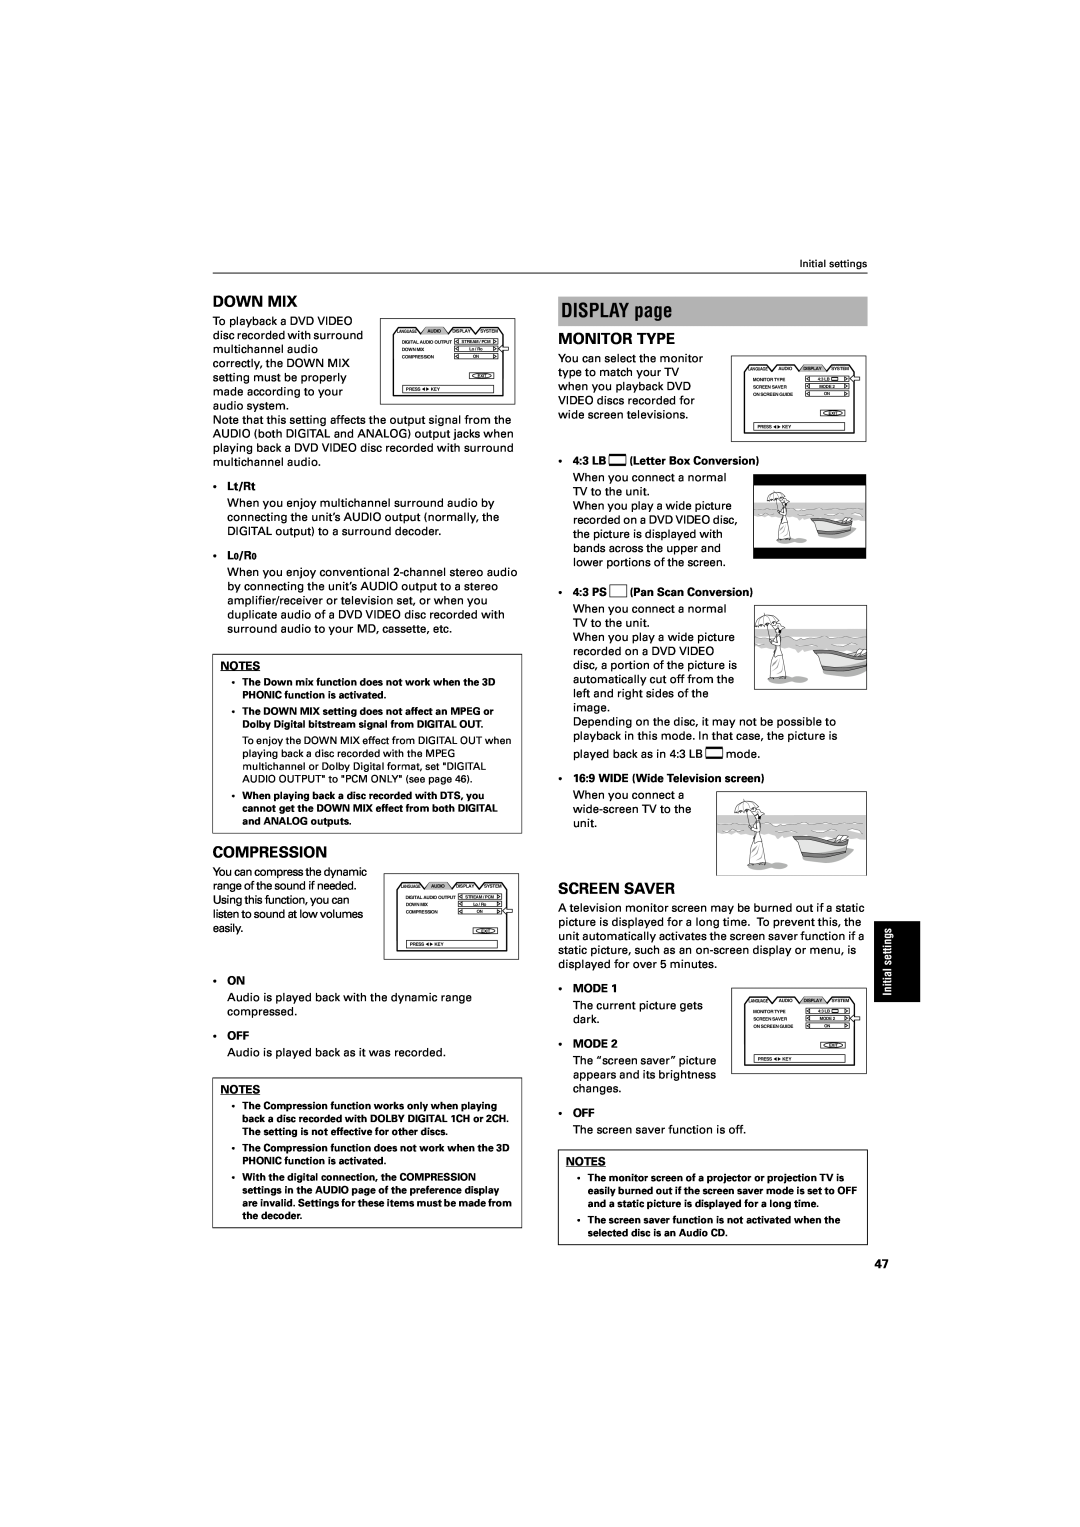 JVC GNT0013-014A DISPLAY page, Down Mix, Monitor Type, Compression, Screen Saver, Lt/Rt, L0/R0, LB Letter Box Conversion 